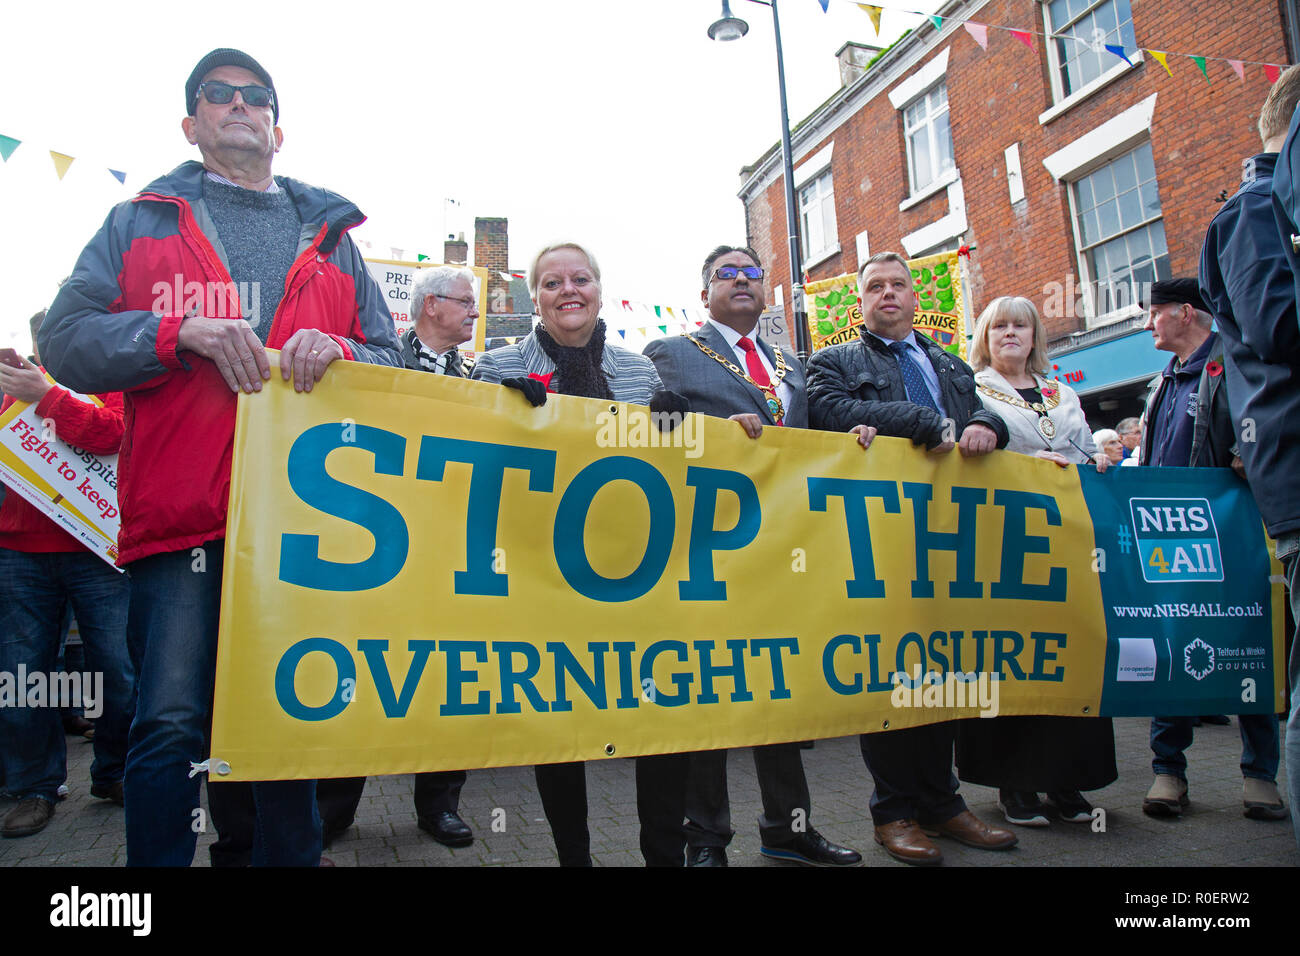 Telford, Shropshire, UK. 4th November, 2018. Over 2,000 people attend a demonstration in Wellington, Telford, Shropshire, to protest against the night time closure of the A&E department at Telford Princess Royal Hospital. Union boses say this will put lives at risk. Credit: Rob Carter/Alamy Live News Stock Photo